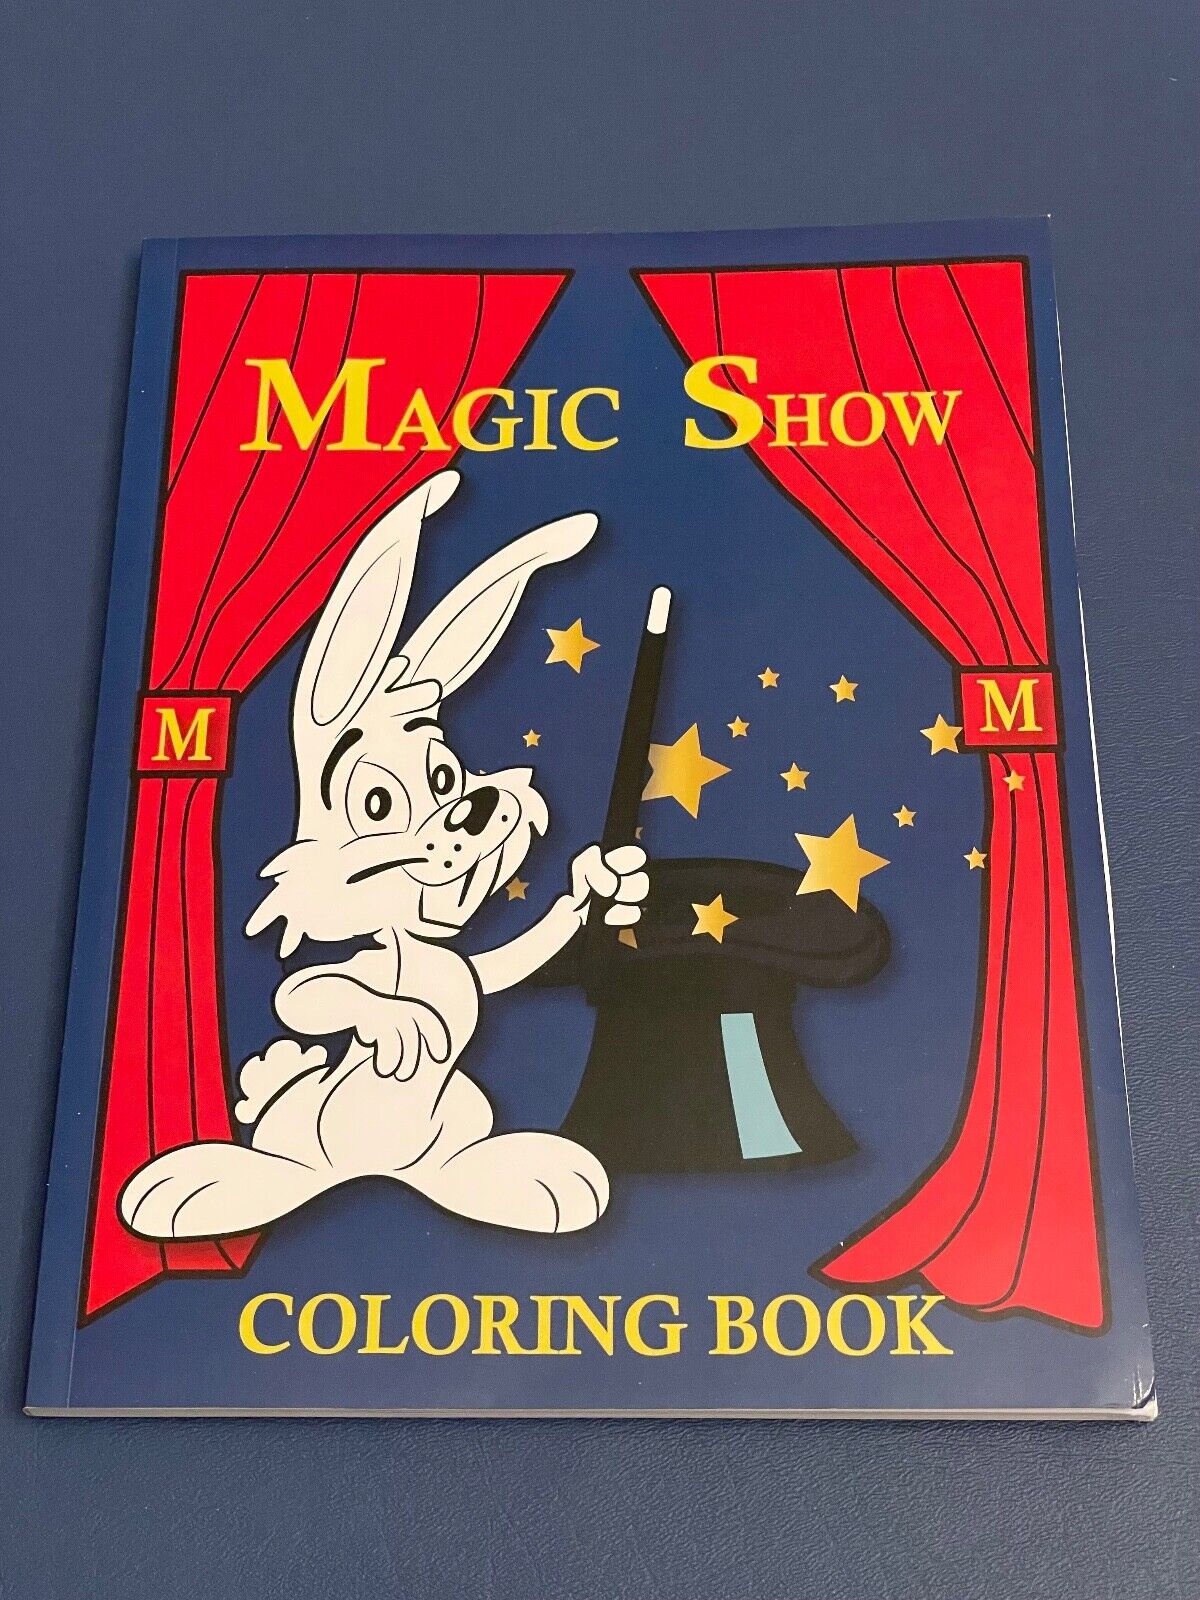 Magic Show Coloring Book -Magic Trick - Great for children\'s shows